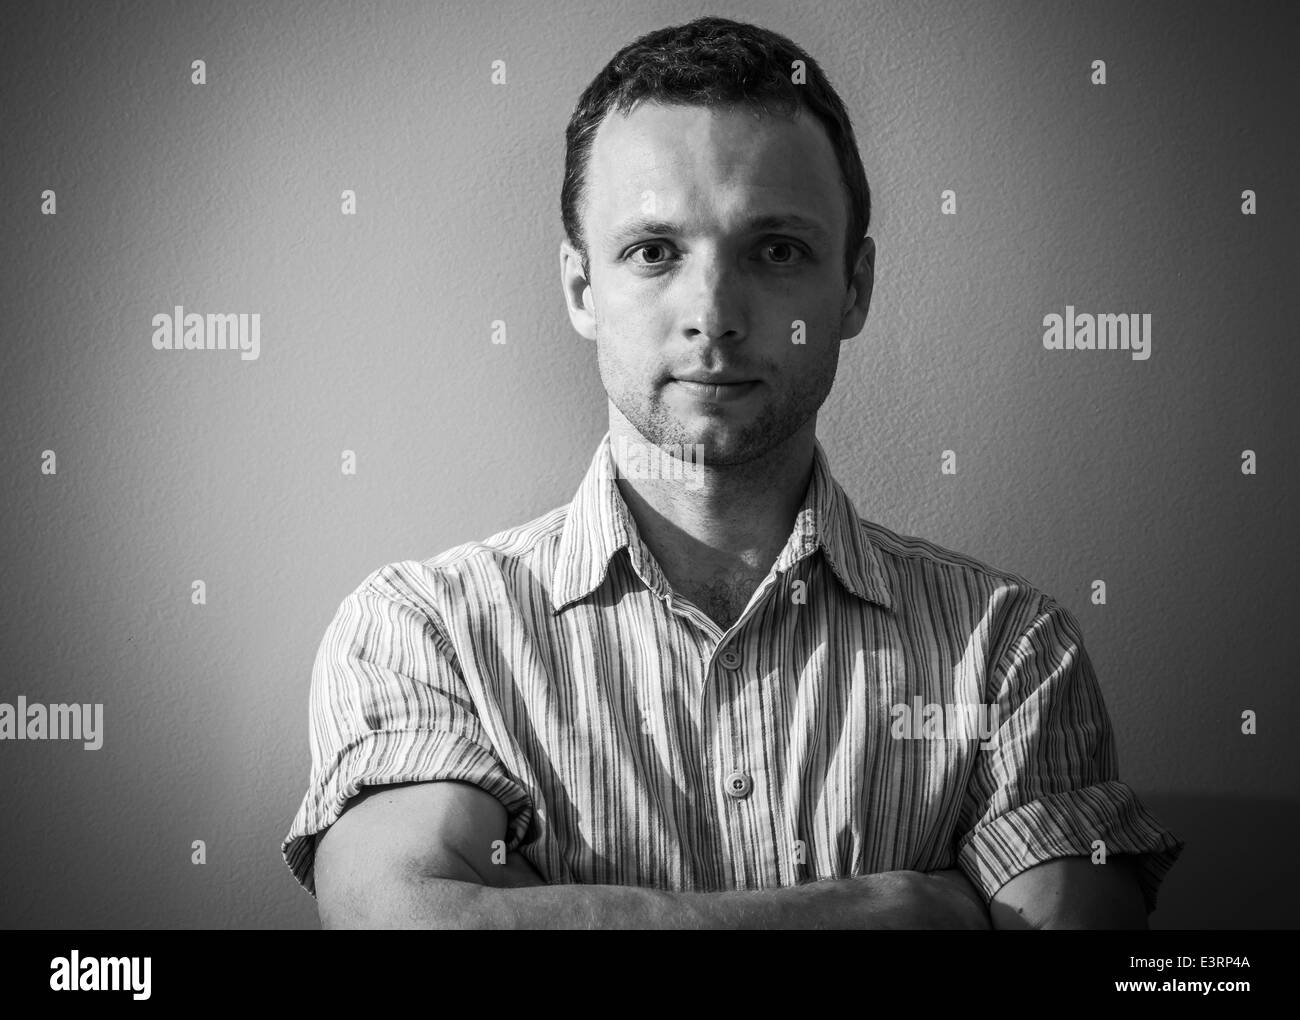 Black and white portrait of young Caucasian man Stock Photo